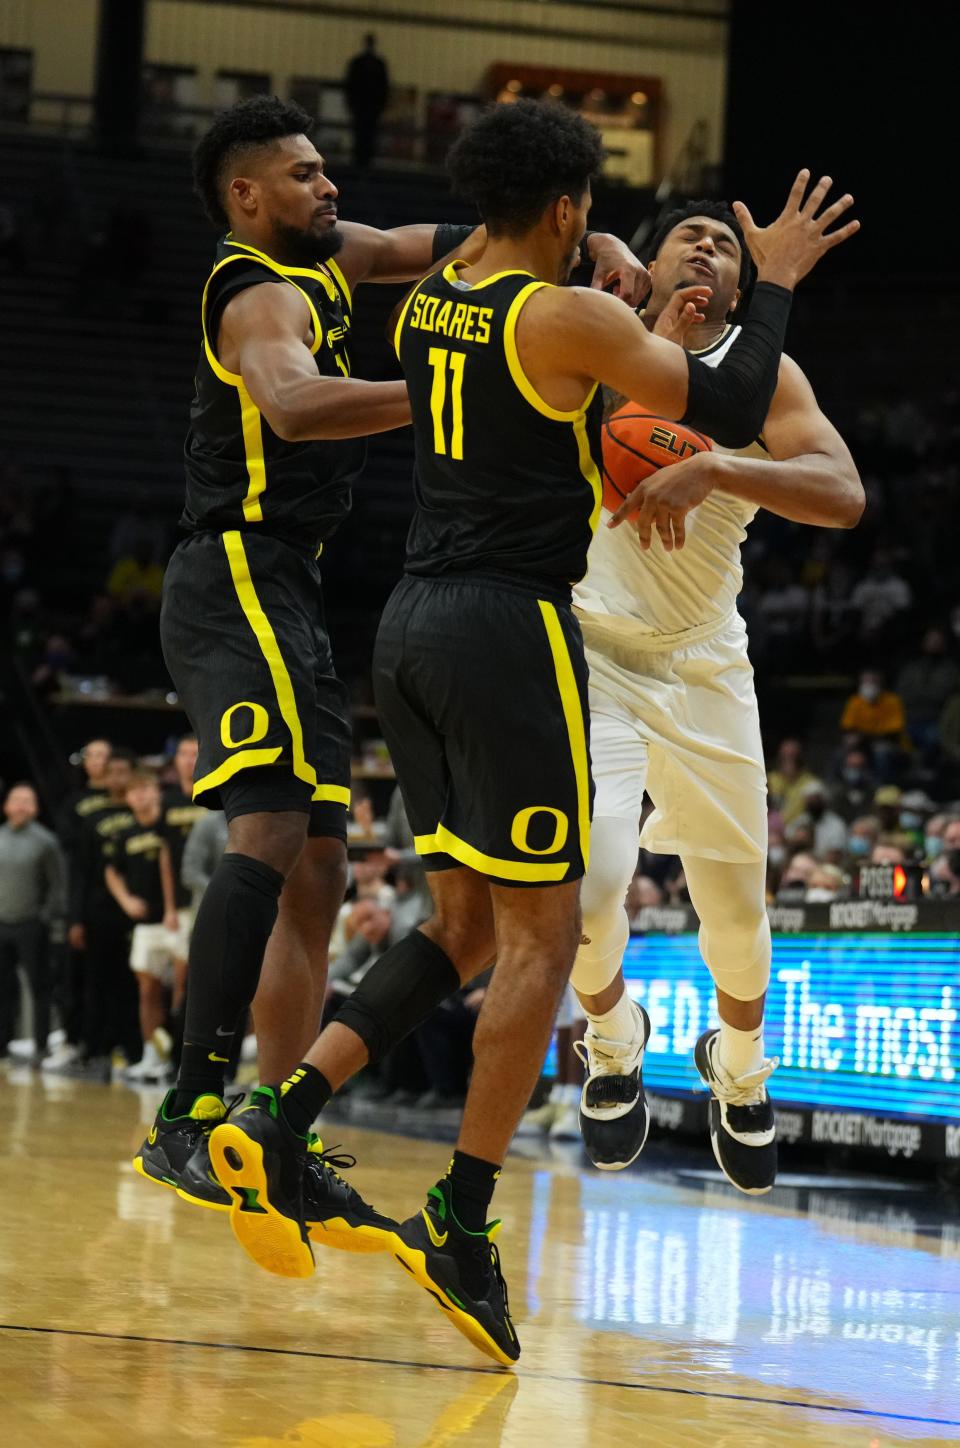 Oregon's Quincy Guerrier (13) and Rivaldo Soares (11) swarm Colorado's Evan Battey in the second half Thursday. Mandatory Credit: Ron Chenoy-USA TODAY Sports